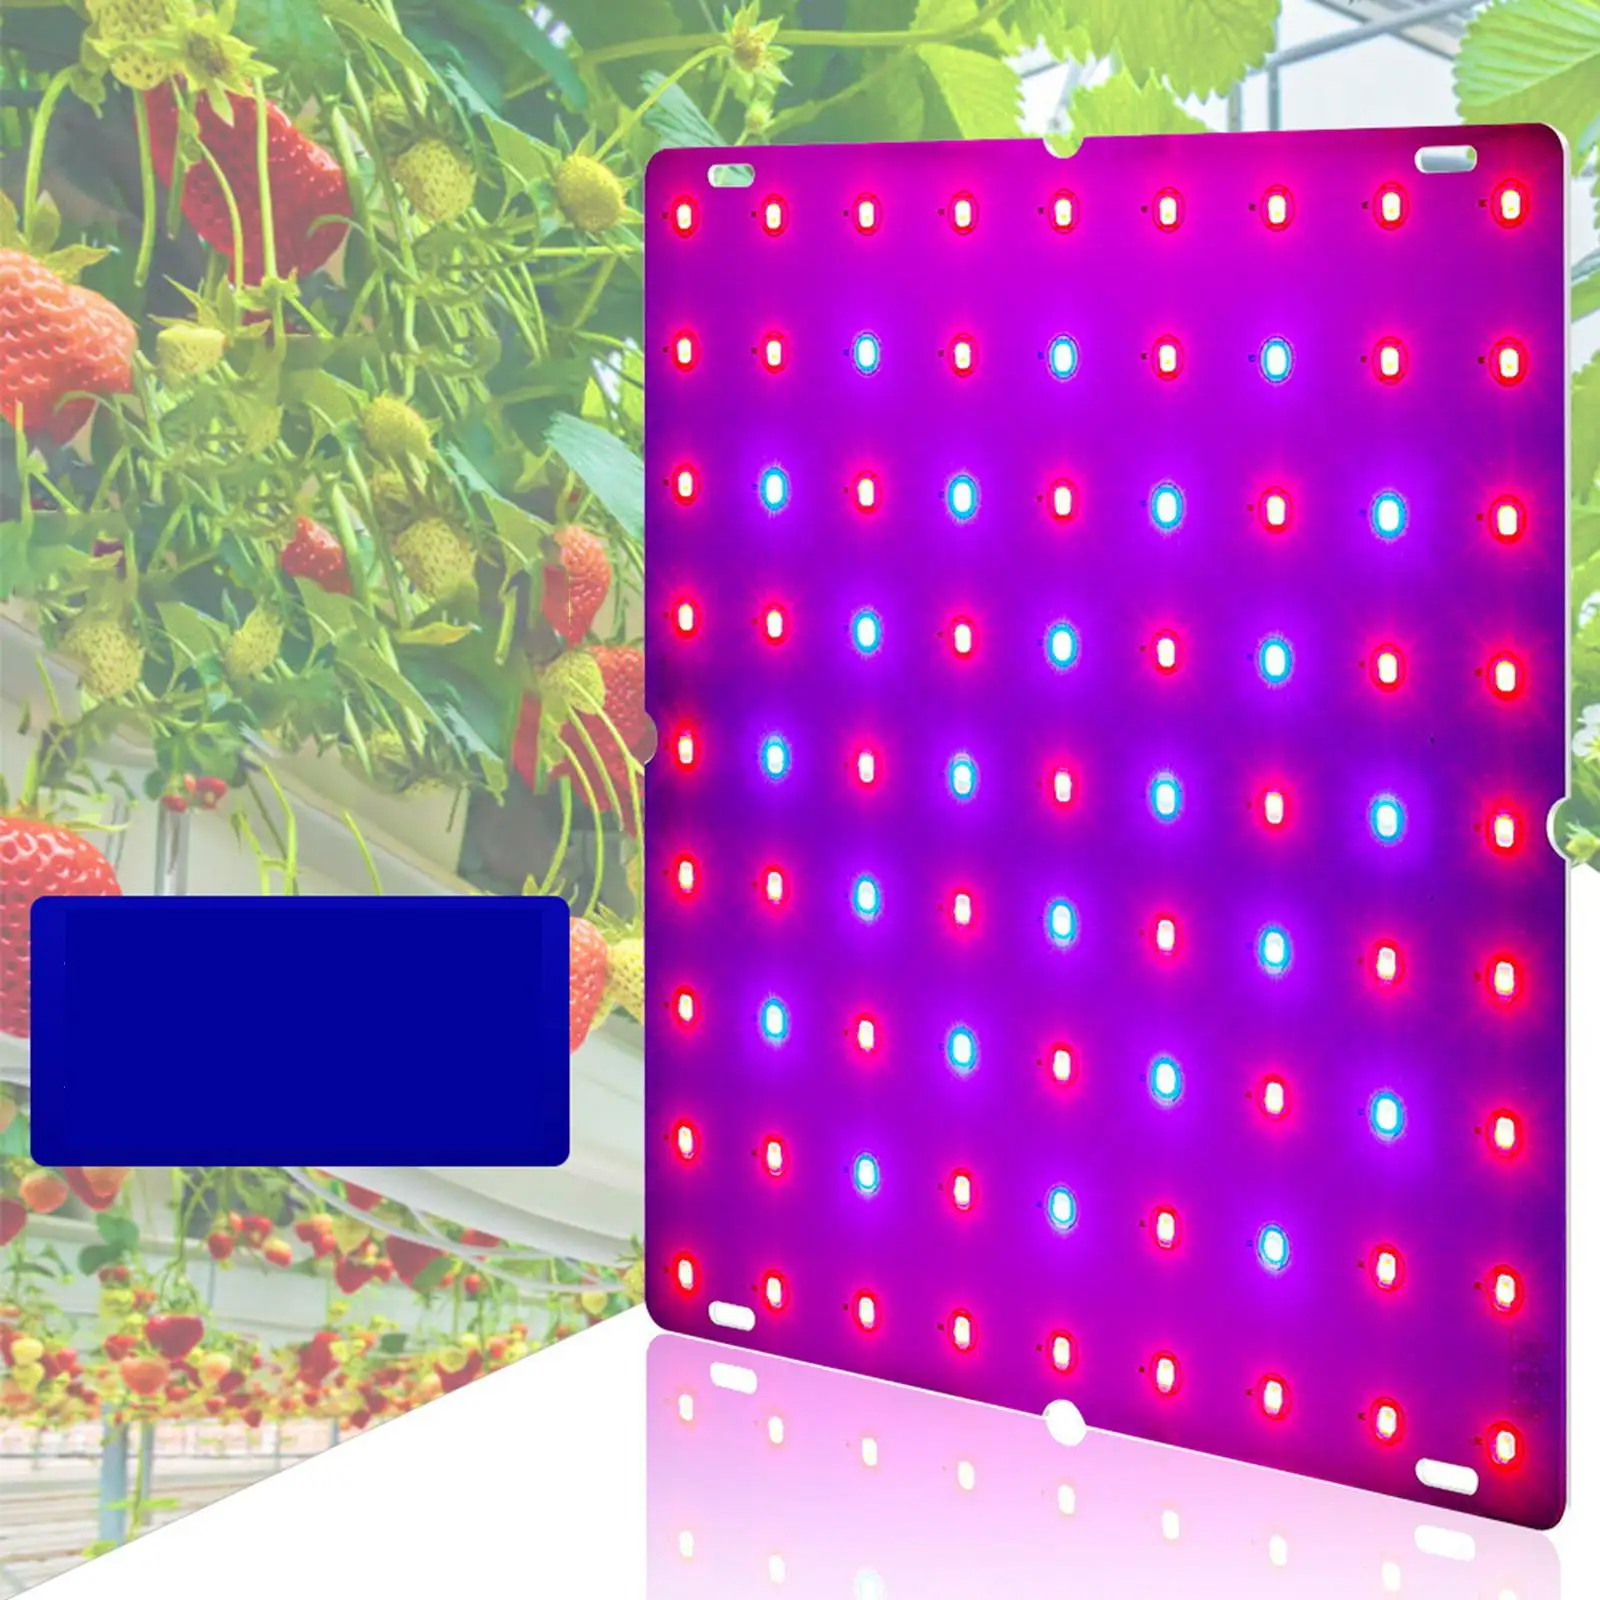 LED Grow Lights Full Grow Light for Bloom Hydroponics Vegetable Seed Starting Greenhouse